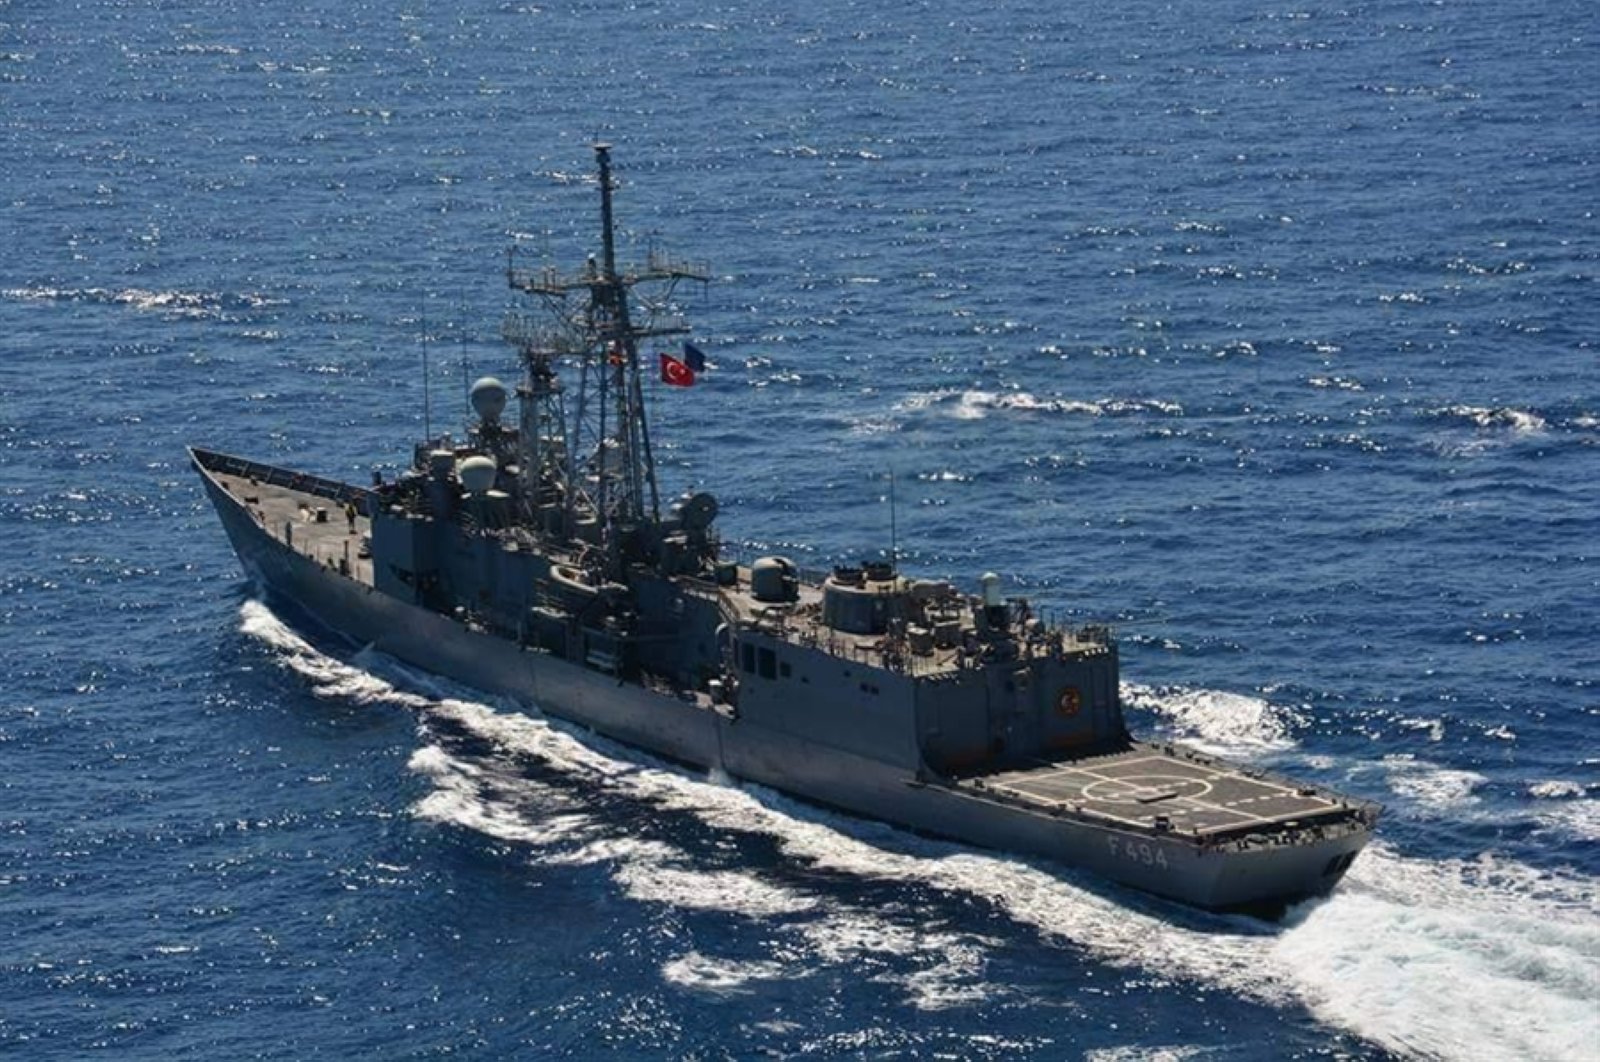 TCG Gökçeada frigate is seen during the drill, June 12, 2020. (COURTESY OF TURKISH MINISTRY OF NATIONAL DEFENSE) 